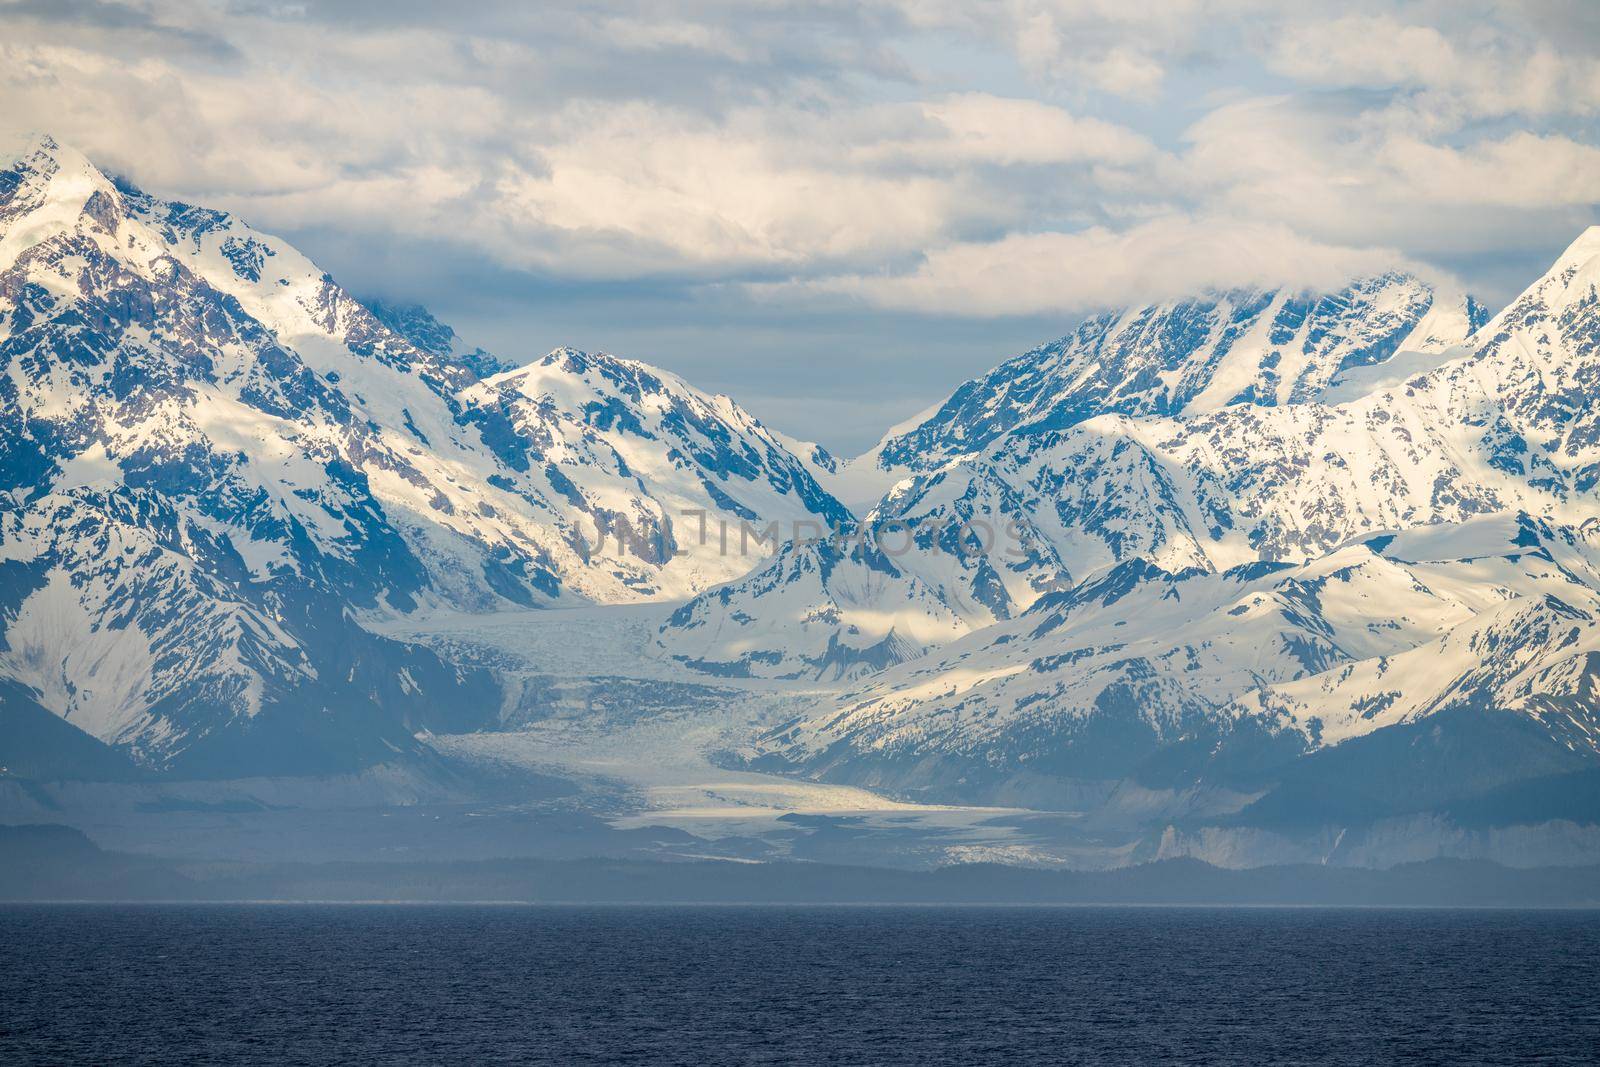 Mt Fairweather and the Glacier Bay National Park in Alaska by steheap